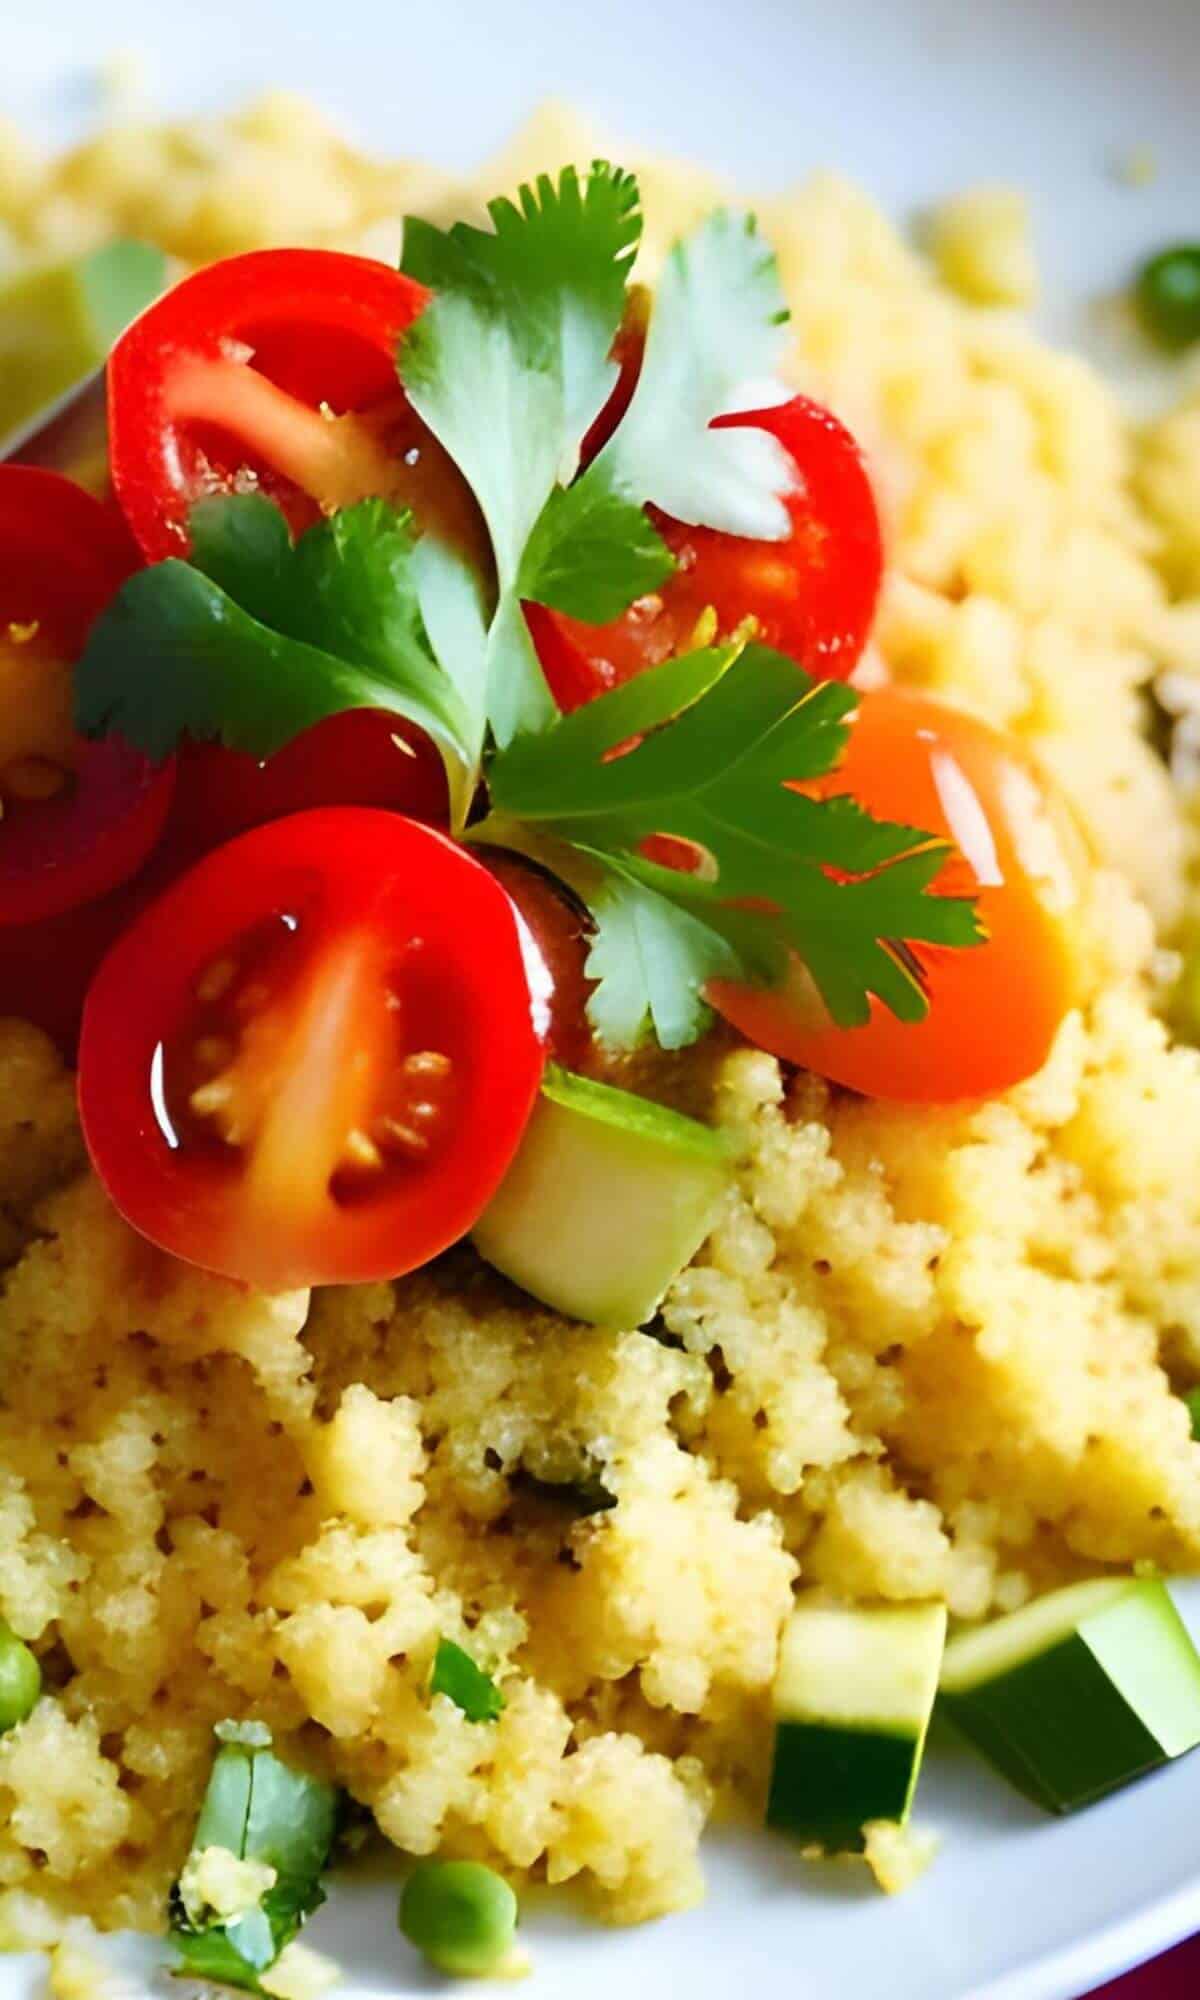 A close up view of couscous with tomatos and herbs on top.